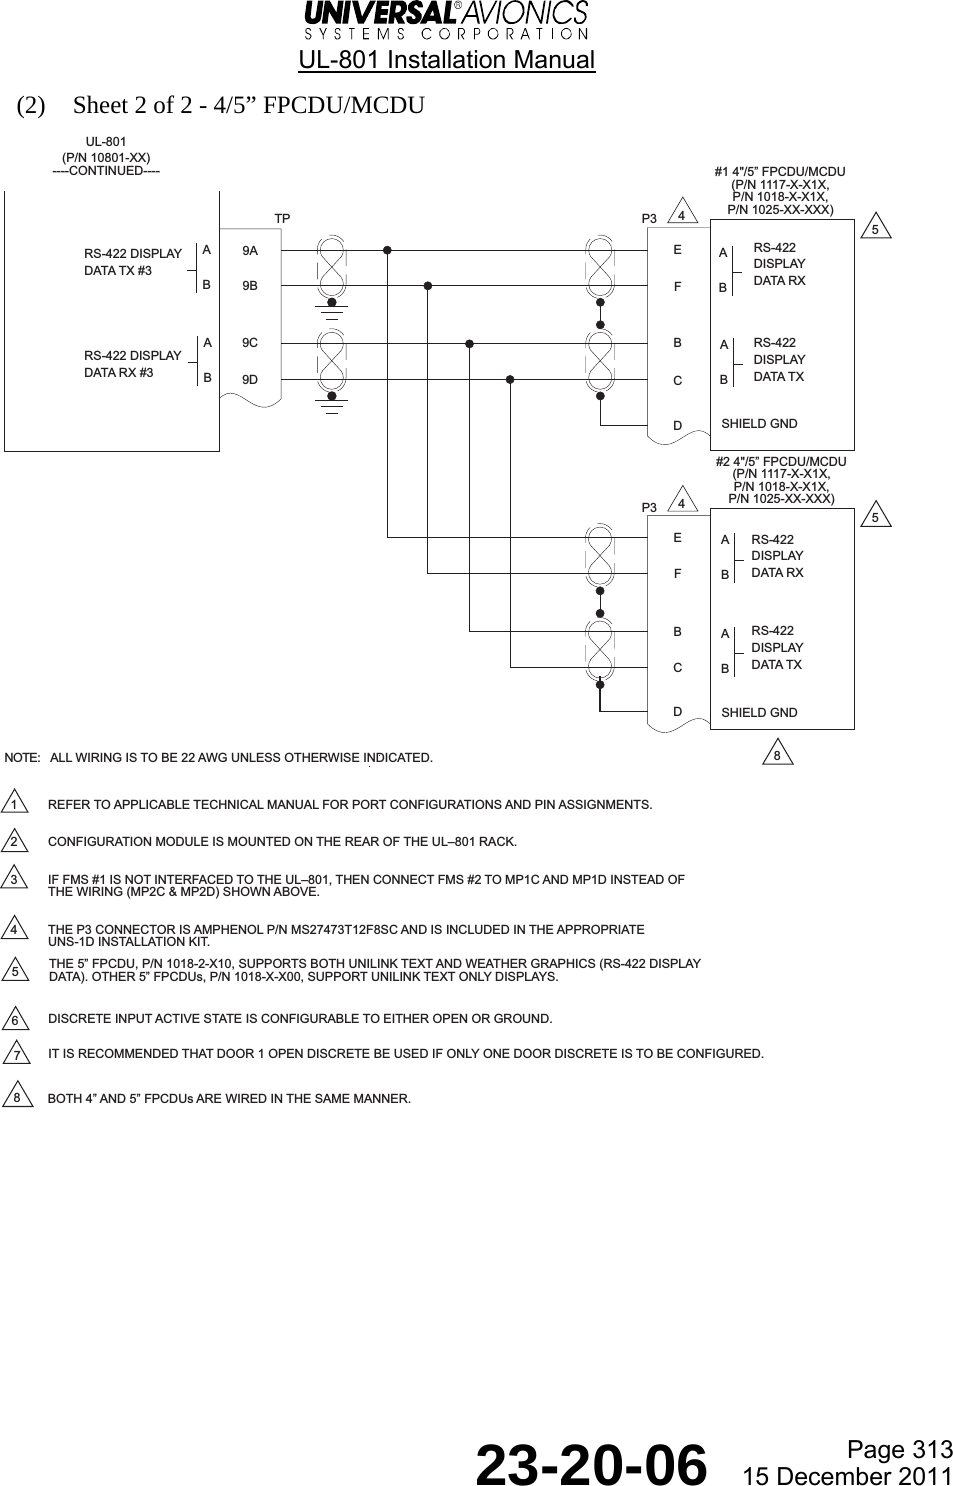  UL-801 Installation Manual  Page 313  23-20-06  15 December 2011 (2) Sheet 2 of 2 - 4/5” FPCDU/MCDU   TP9A9BRS-422 DISPLAYDATA TX #3RS-422DISPLAYDATA RX9C9DRS-422 DISPLAYDATA RX #3RS-422DISPLAYDATA TXP3RS-422DISPLAYDATA RXRS-422DISPLAYDATA TXP3EFBCDEFBCDSHIELD GNDSHIELD GND55441 REFER TO APPLICABLE TECHNICAL MANUAL FOR PORT CONFIGURATIONS AND PIN ASSIGNMENTS.2 CONFIGURATION MODULE IS MOUNTED ON THE REAR OF THE UL801 RACK.3 IF FMS #1 IS NOT INTERFACED TO THE UL801, THEN CONNECT FMS #2 TO MP1C AND MP1D INSTEAD OFTHE WIRING (MP2C &amp; MP2D) SHOWN ABOVE.4 THE P3 CONNECTOR IS AMPHENOL P/N MS27473T12F8SC AND IS INCLUDED IN THE APPROPRIATEUNS-1D INSTALLATION KIT.DISCRETE INPUT ACTIVE STATE IS CONFIGURABLE TO EITHER OPEN OR GROUND.IT IS RECOMMENDED THAT DOOR 1 OPEN DISCRETE BE USED IF ONLY ONE DOOR DISCRETE IS TO BE CONFIGURED.67ALL WIRING IS TO BE 22 AWG UNLESS OTHERWISE INDICATED.NOTE:UL-801(P/N 10801-XX)----CONTINUED----5THE 5 FPCDU, P/N 1018-2-X10, SUPPORTS BOTH UNILINK TEXT AND WEATHER GRAPHICS (RS-422 DISPLAYDATA). OTHER 5 FPCDUs, P/N 1018-X-X00, SUPPORT UNILINK TEXT ONLY DISPLAYS.8BOTH 4 AND 5 FPCDUs ARE WIRED IN THE SAME MANNER.8#1 4&quot;/5 FPCDU/MCDU(P/N 1117-X-X1X,P/N 1018-X-X1X,P/N 1025-XX-XXX)#2 4&quot;/5 FPCDU/MCDU(P/N 1117-X-X1X,P/N 1018-X-X1X,P/N 1025-XX-XXX)ABABABABABAB